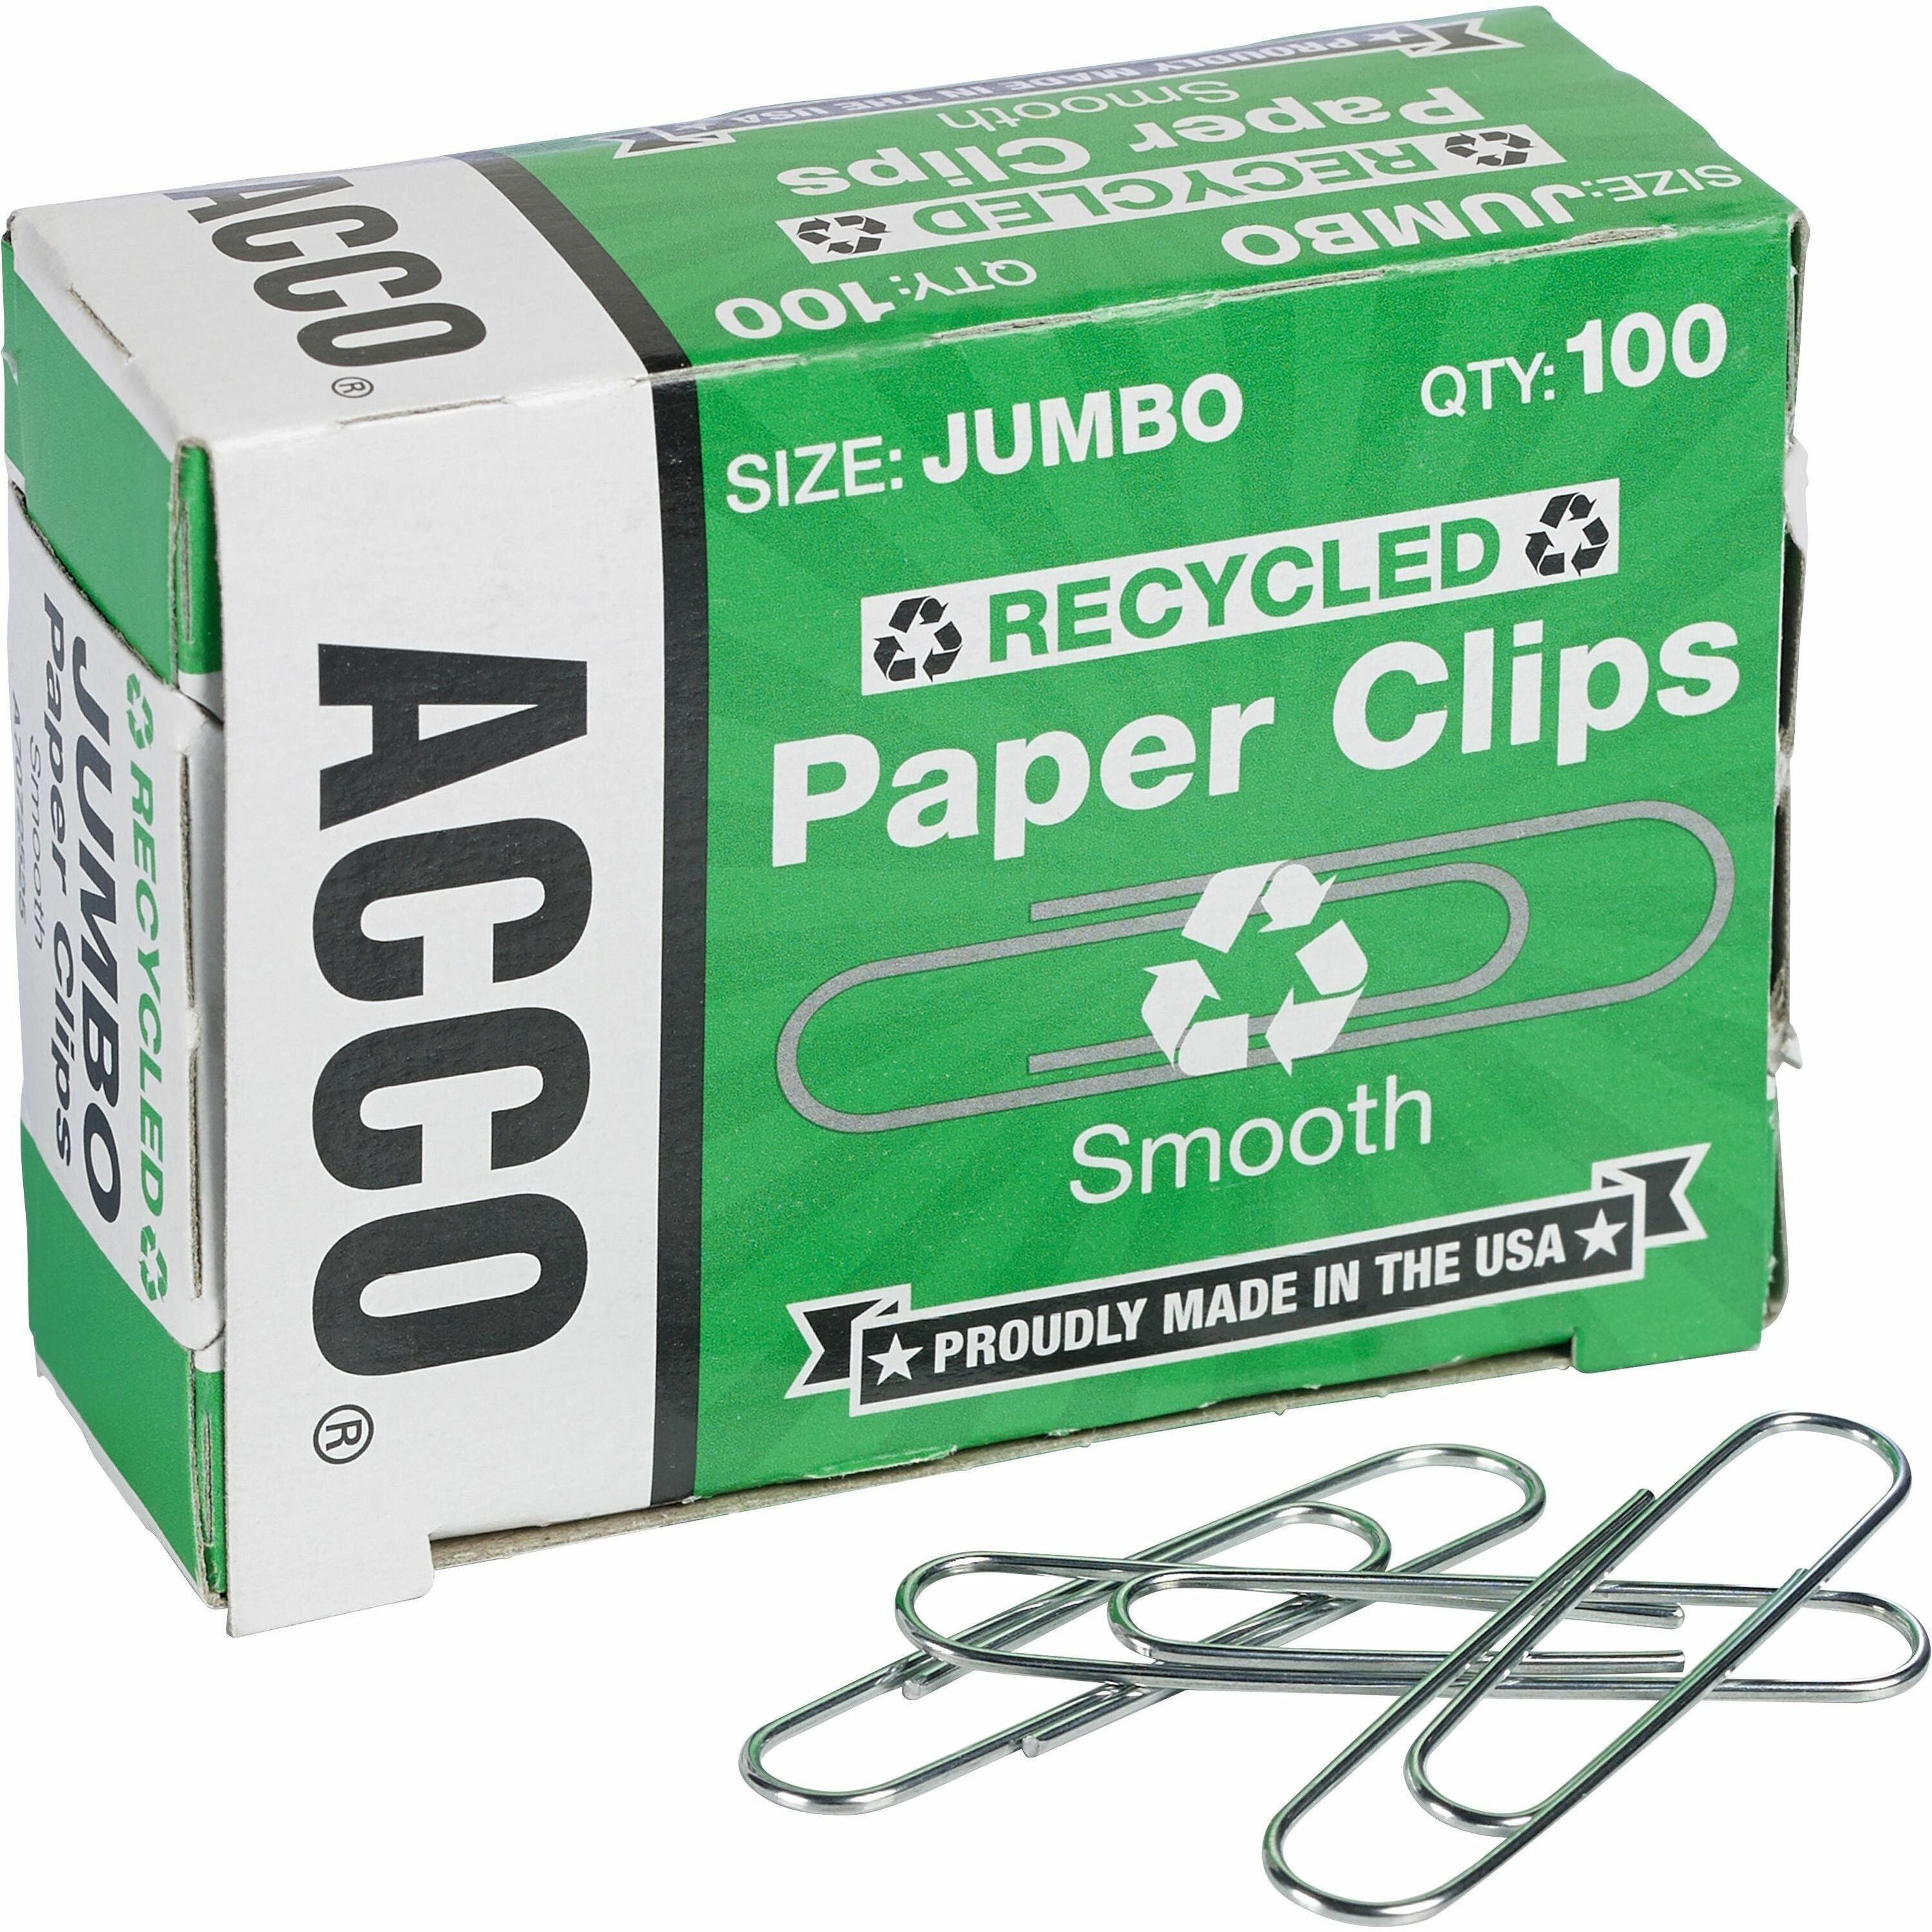 ACCO Recycled Paper Clips - Jumbo - 1.6" Length - 20 Sheet Capacity - for Paper - Reusable, Durable - 1000 / Pack - Silver - 1